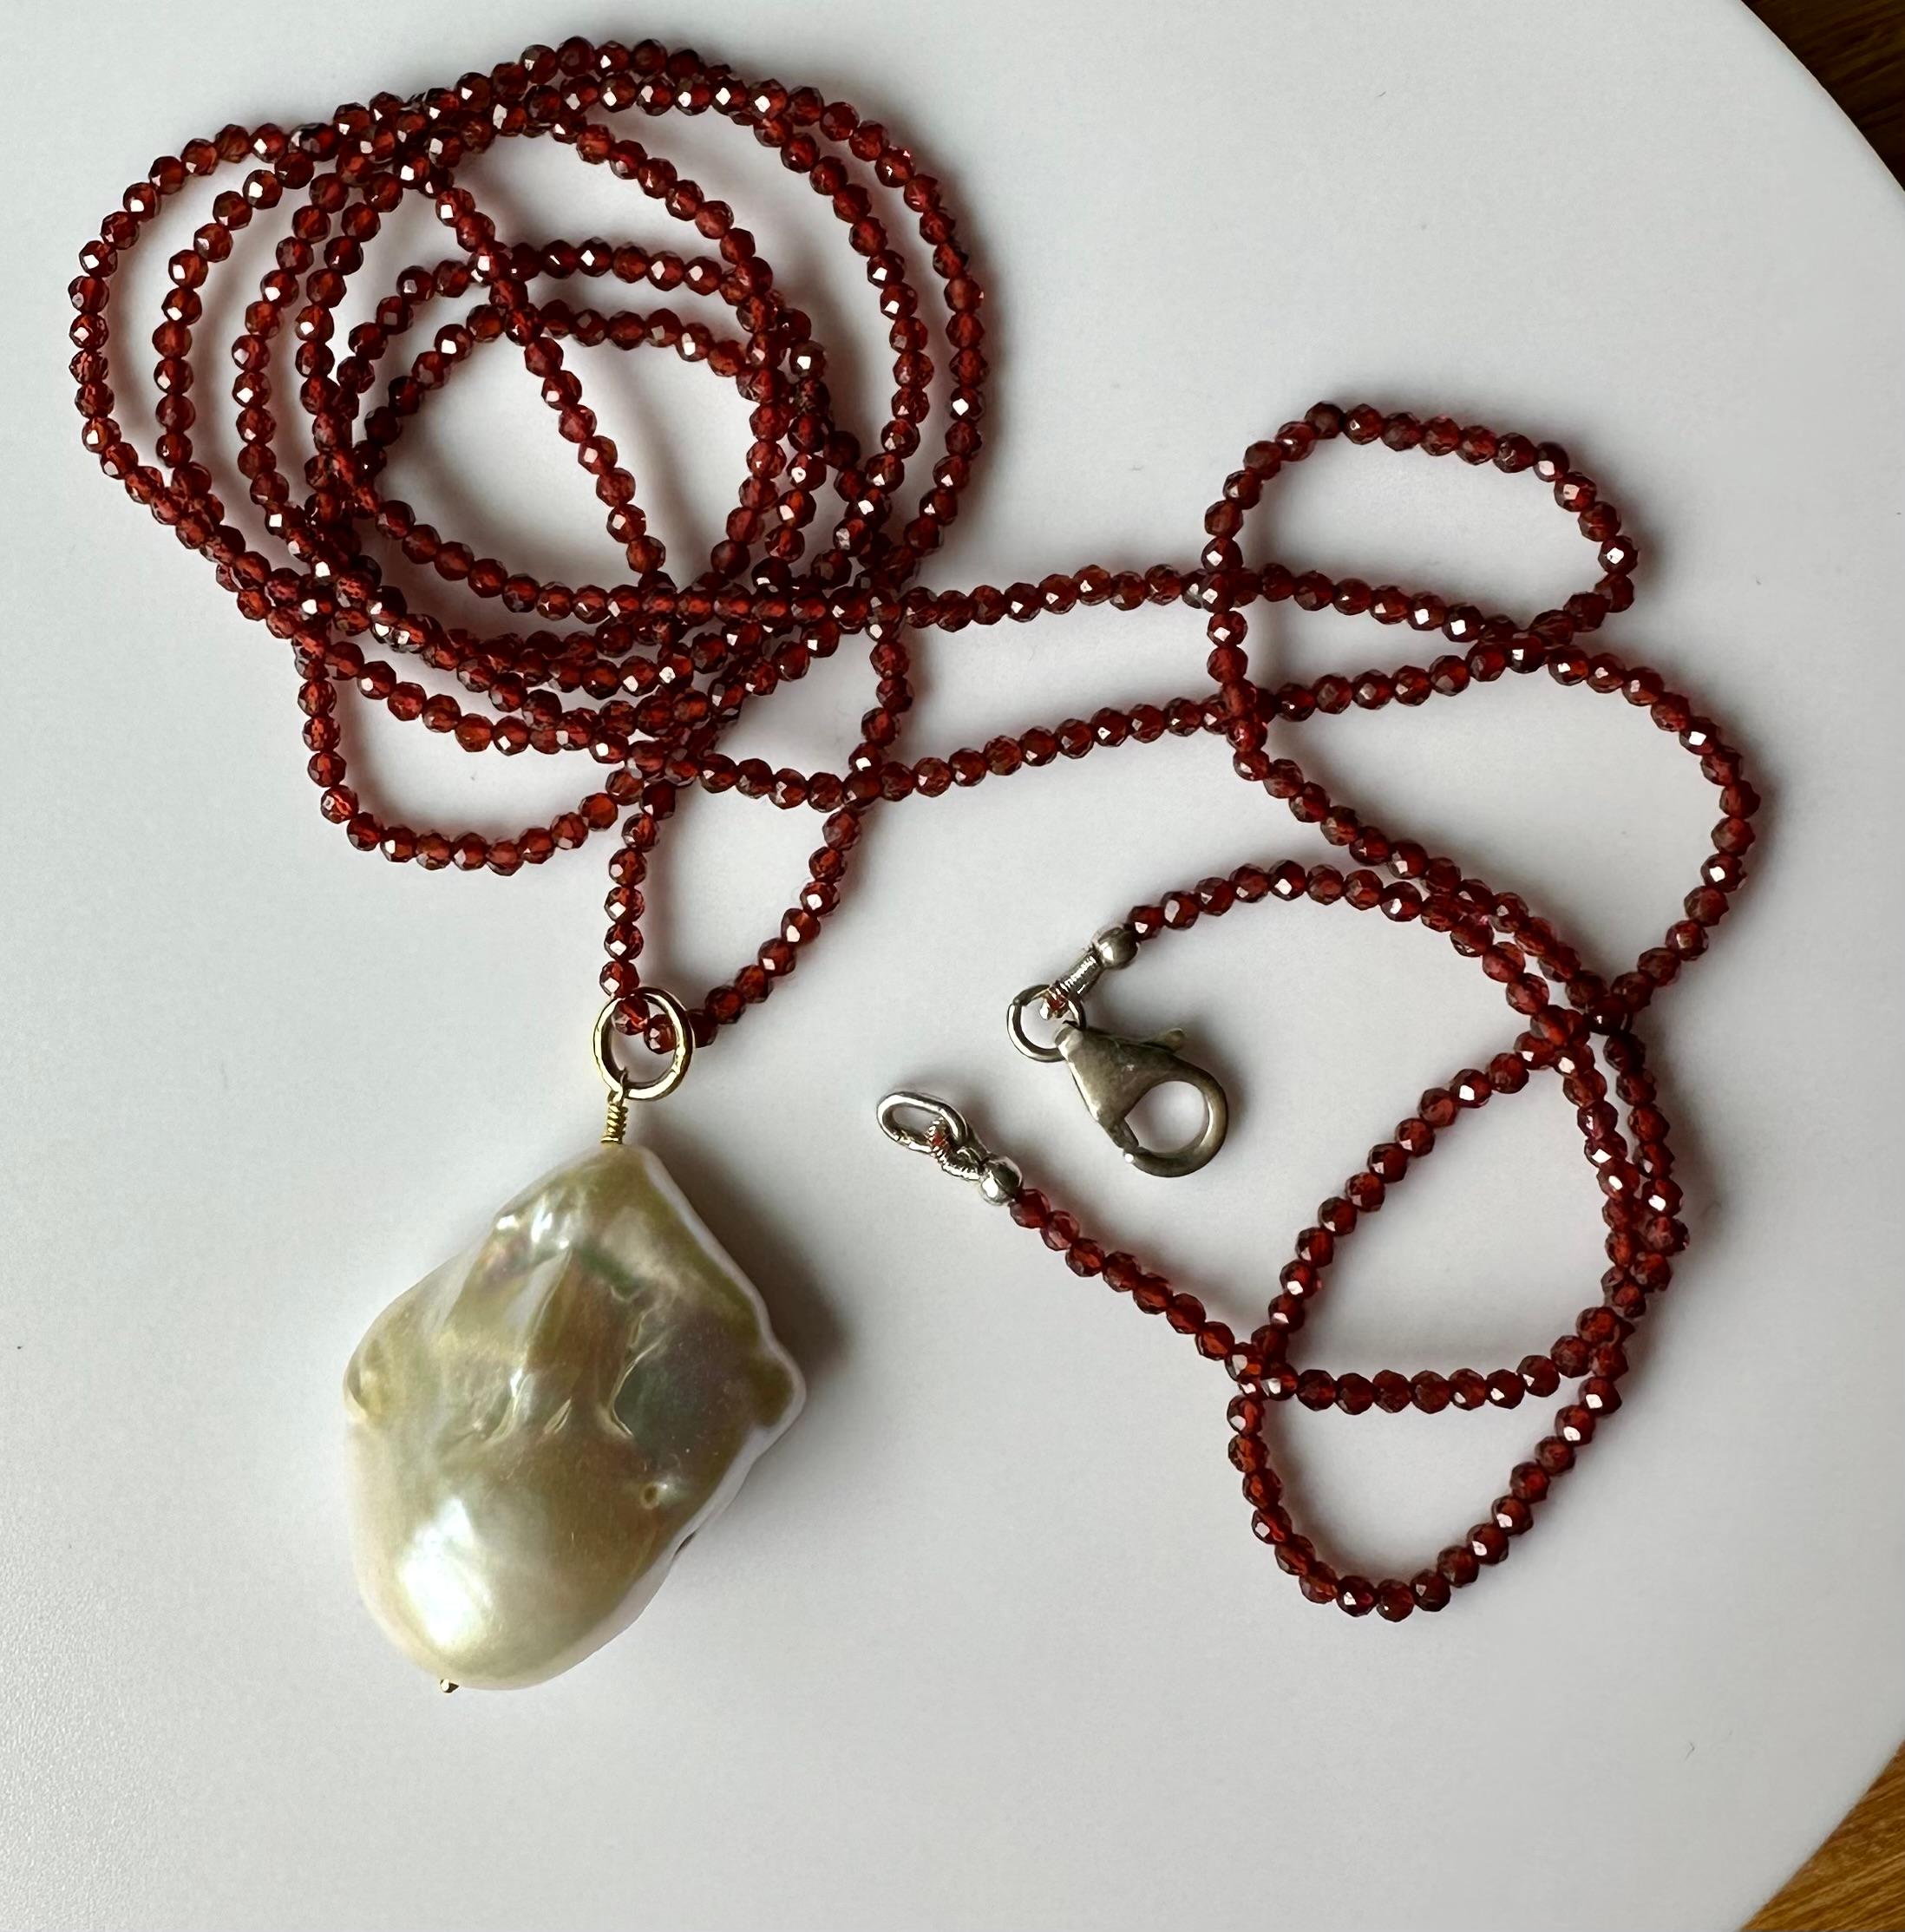 Rough Cut A Baroque South Sea Pearl Pendant hanging from a 24 Inch Beaded Garnet Necklace For Sale